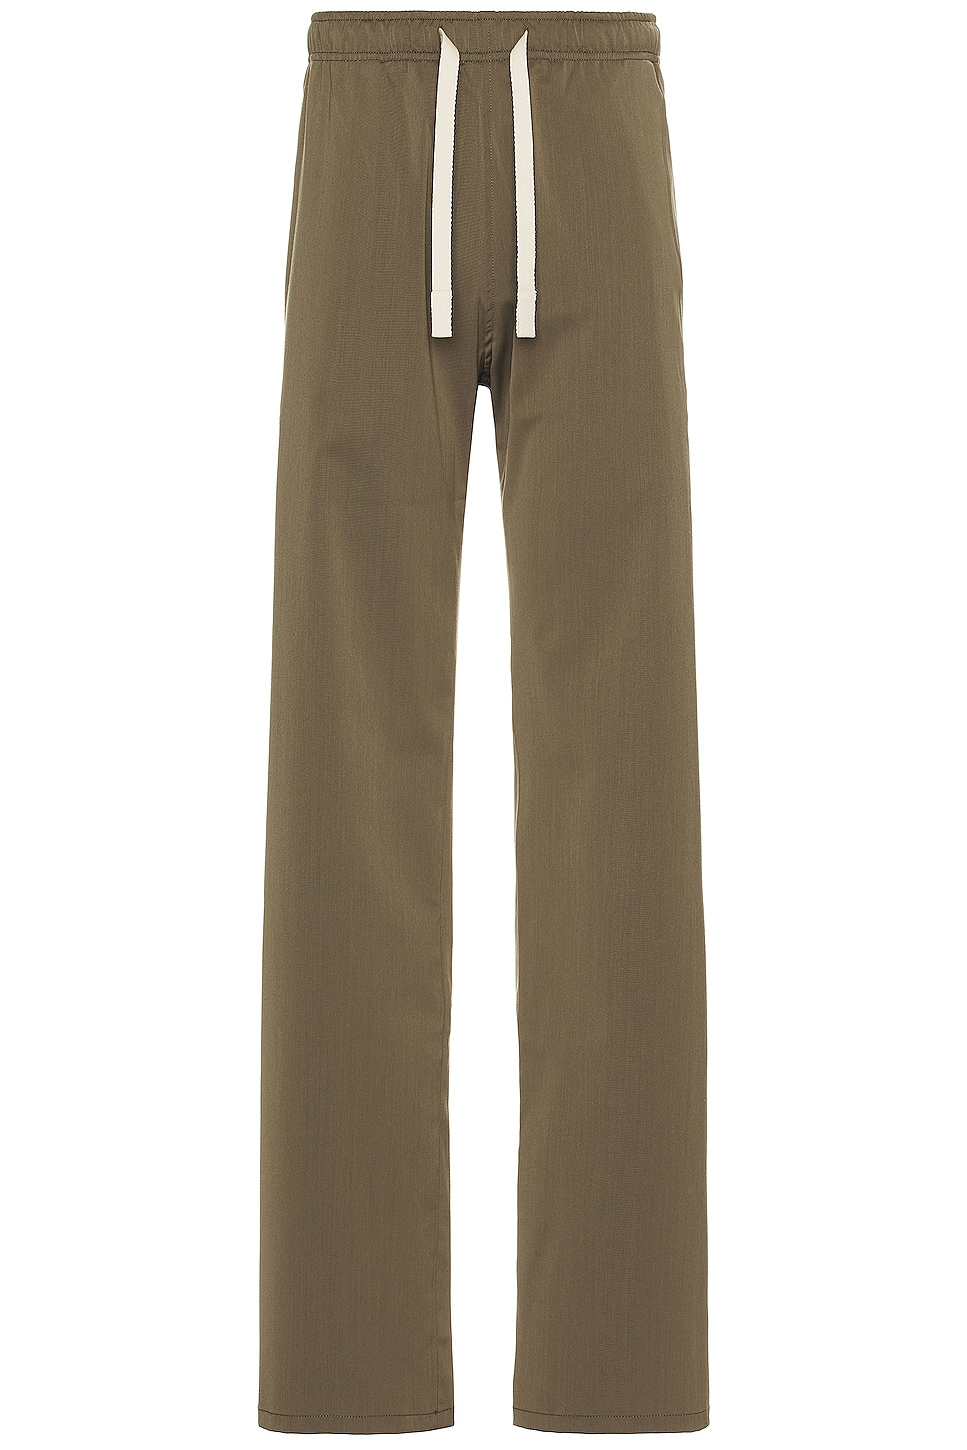 Image 1 of Palm Angels Monogram Travel Pants in Military